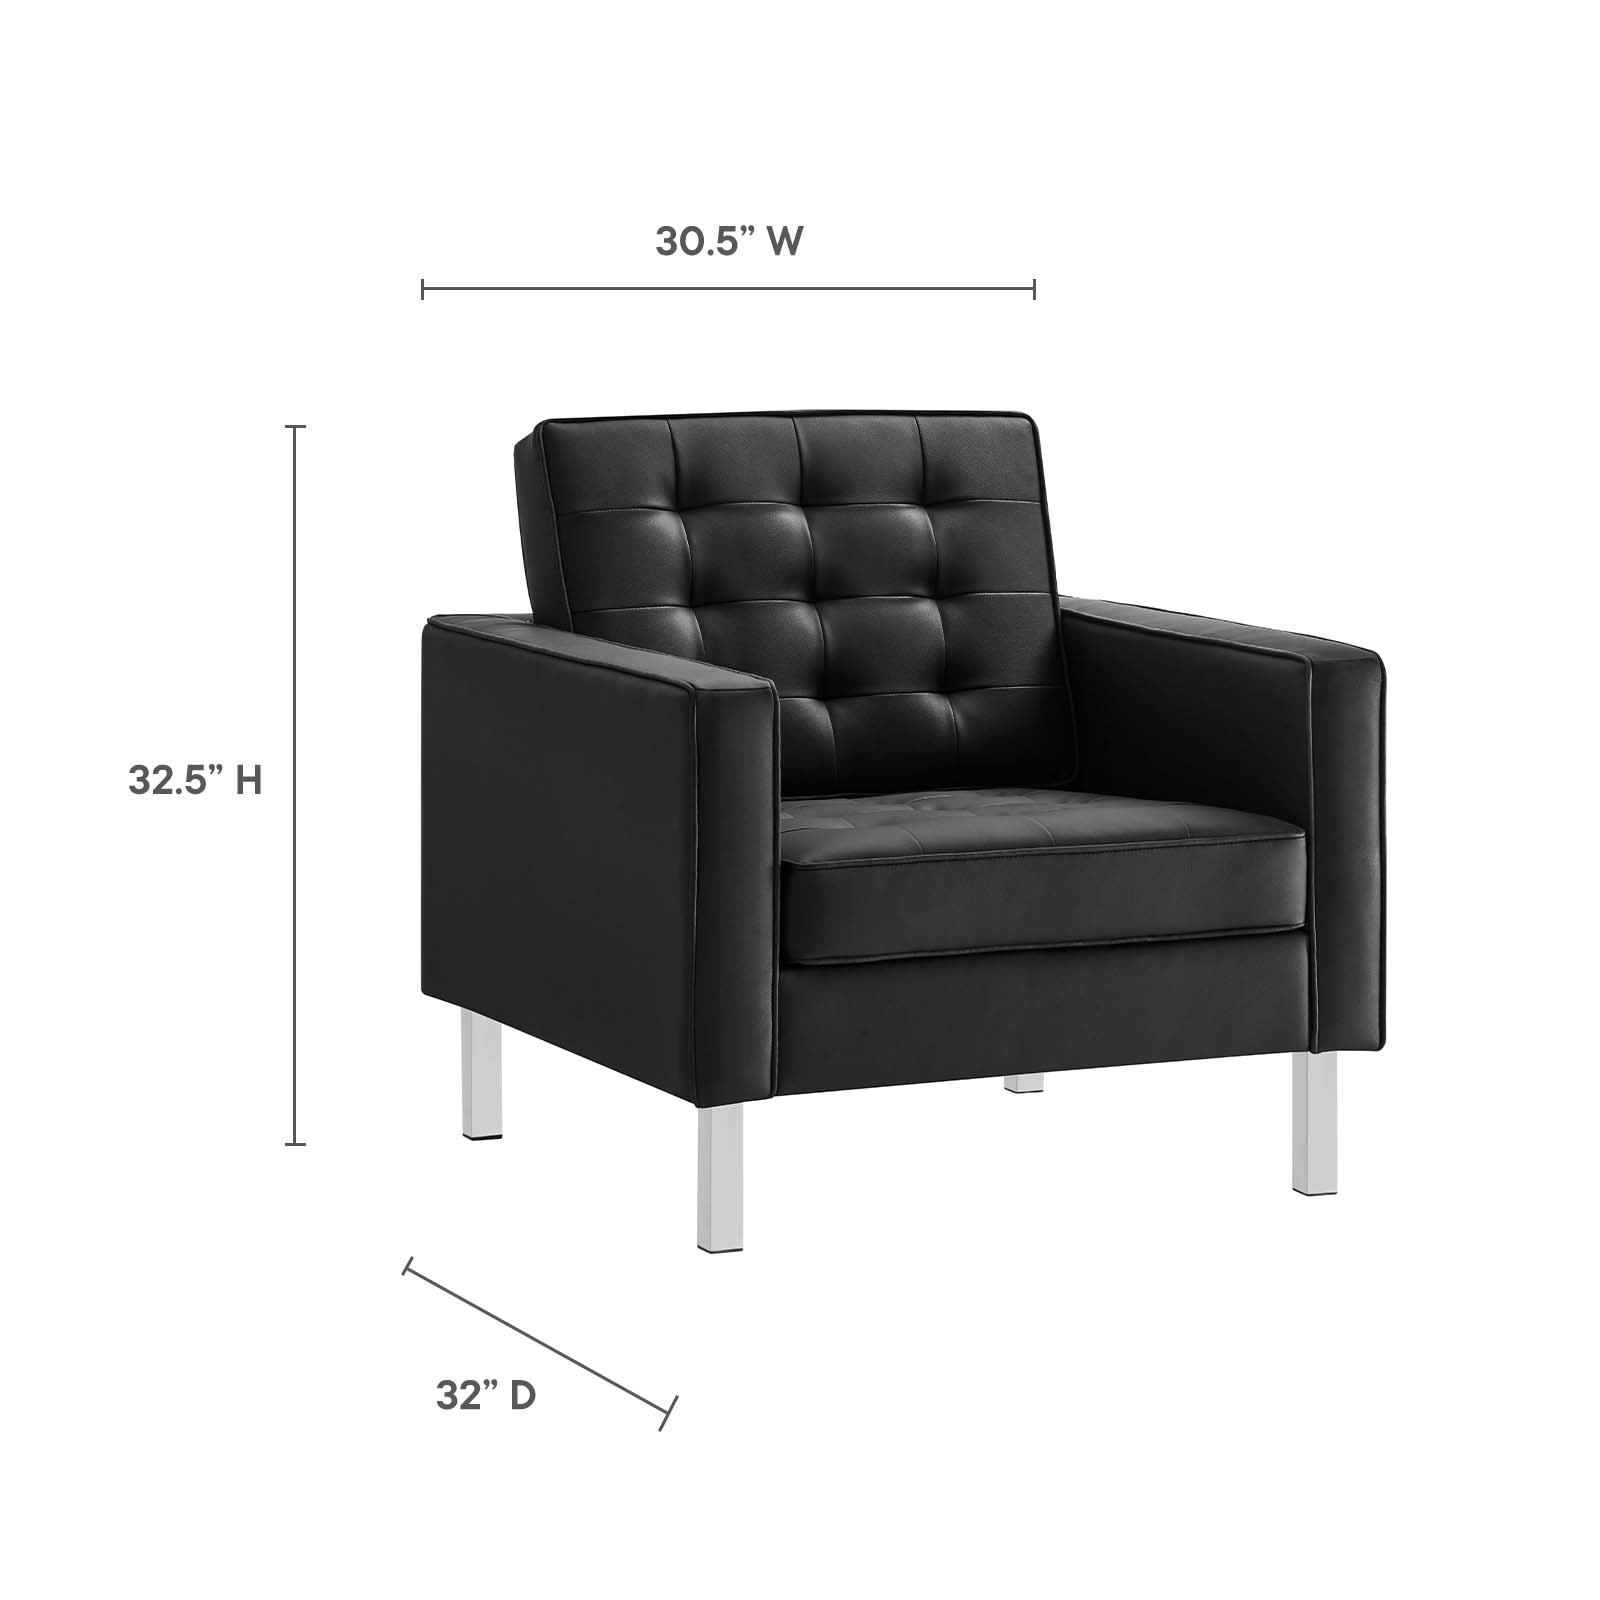 Modway Living Room Sets - Loft Tufted Upholstered Faux Leather Armchair Set of 2 Silver Black